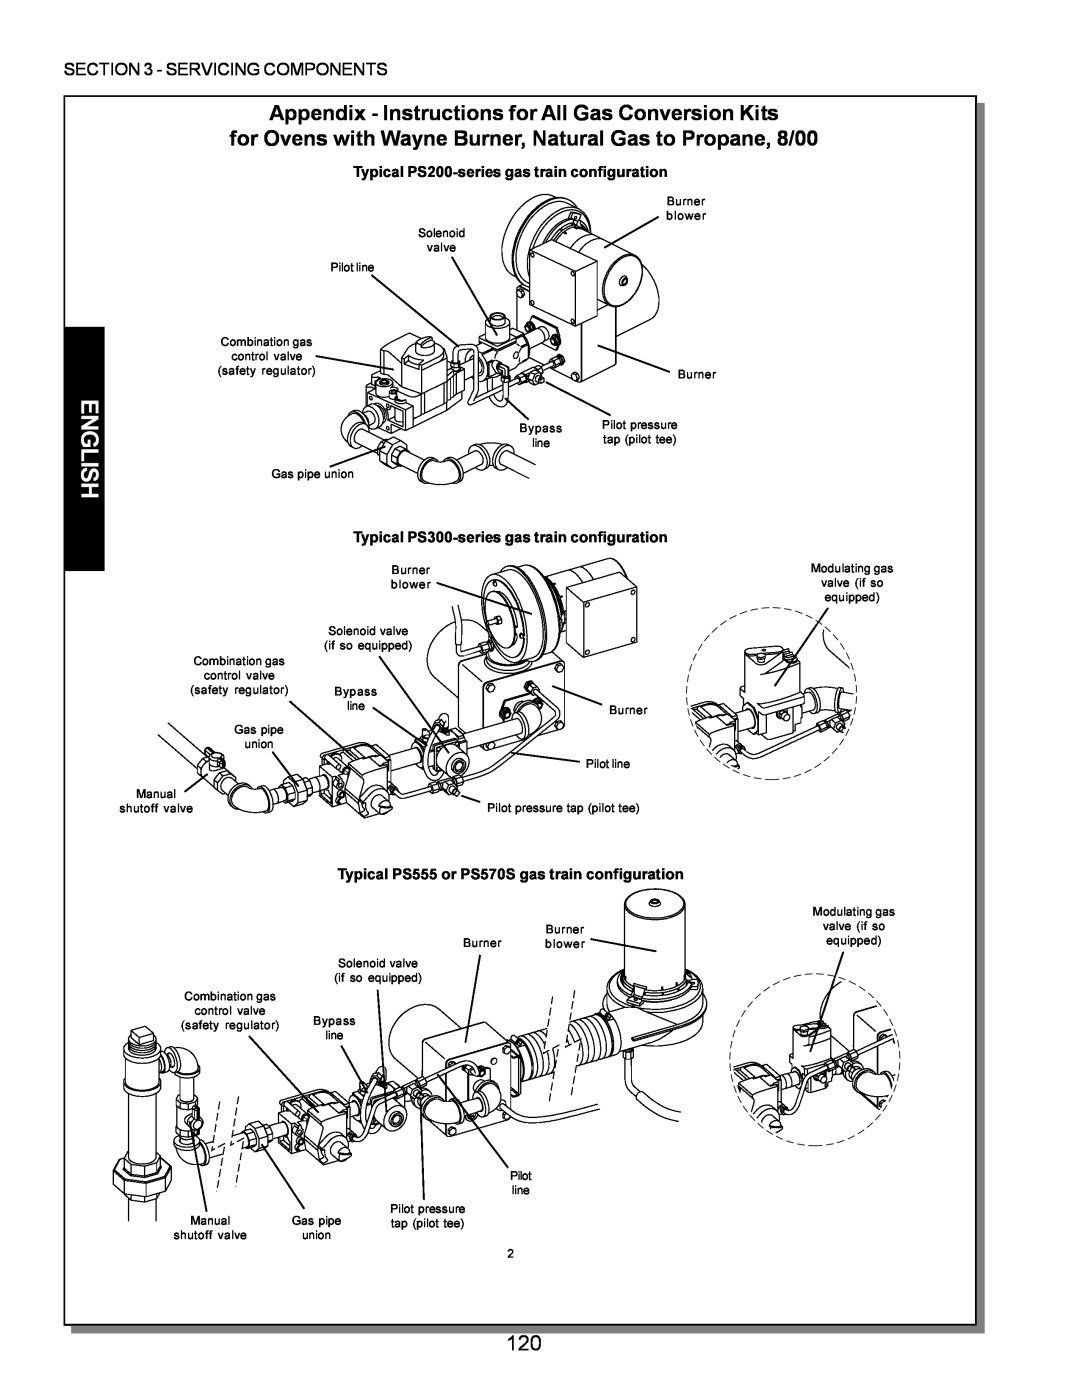 Middleby Marshall PS360, PS570, PS200, PS555, PS220, PS224 PS310 English, Appendix - Instructions for All Gas Conversion Kits 